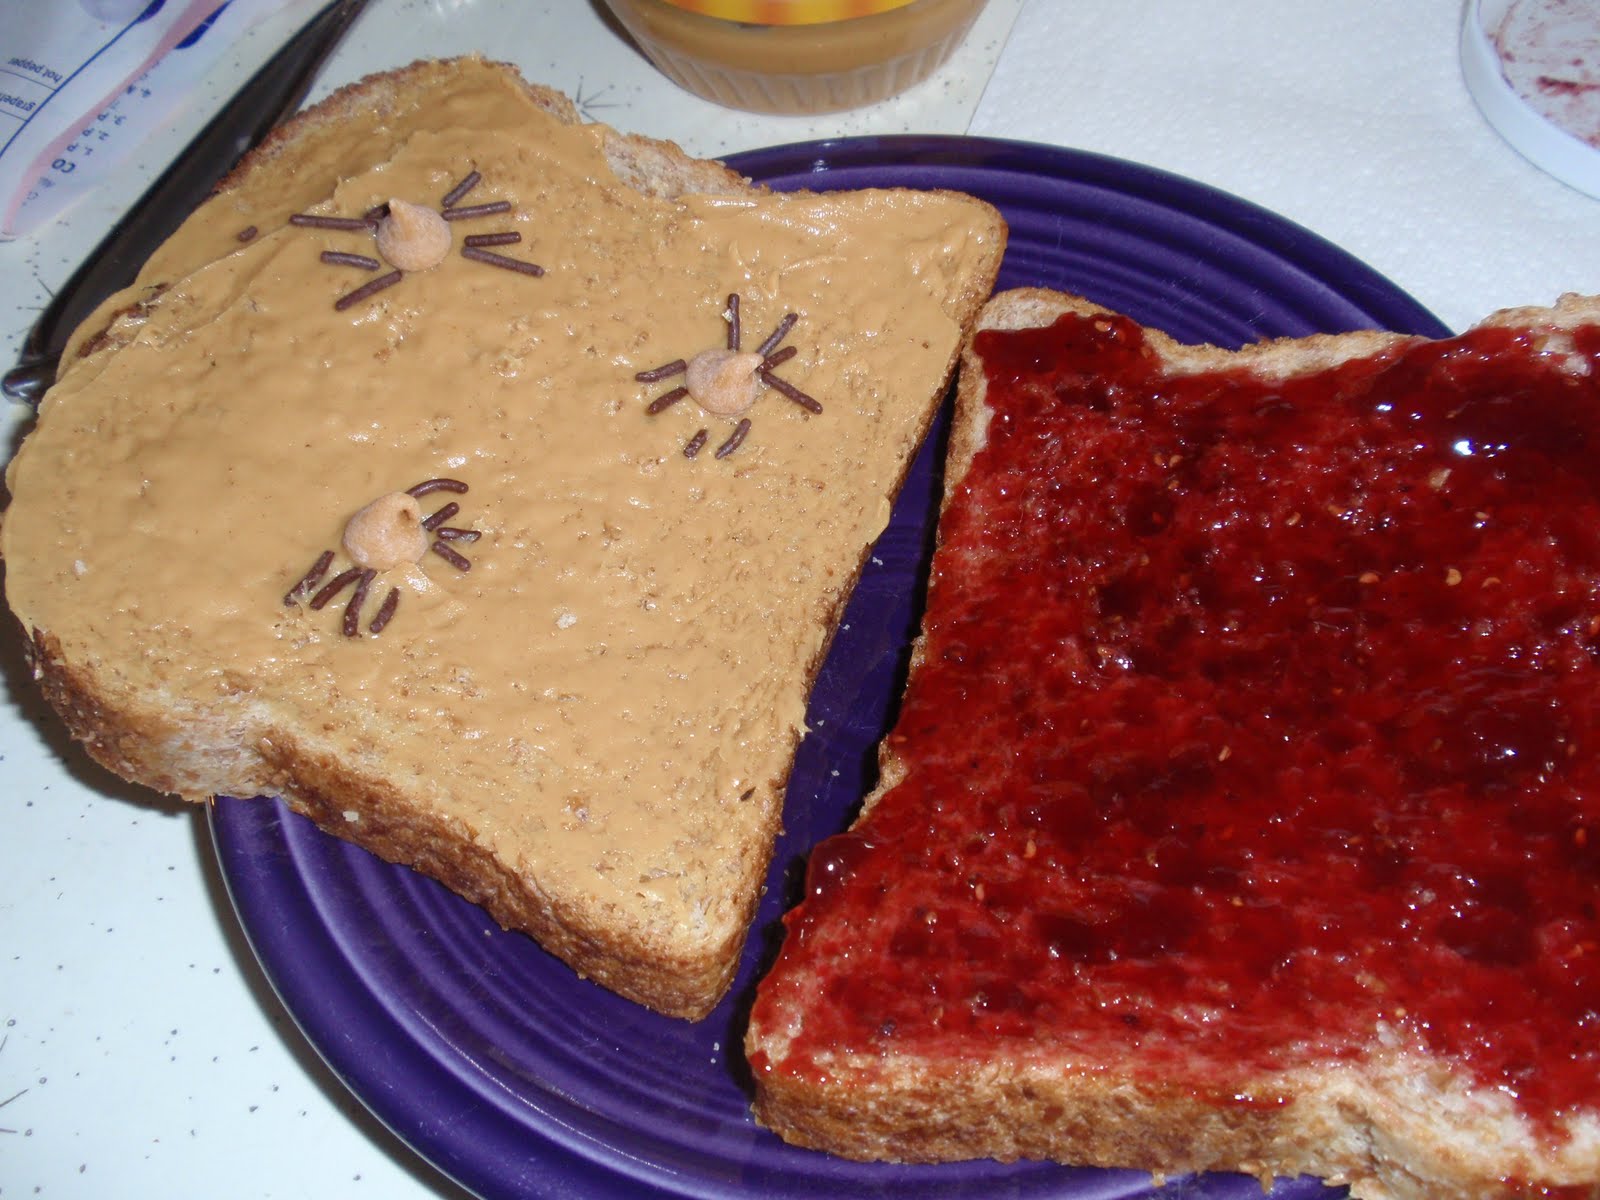 Peanut Butter And Jelly Tattoo